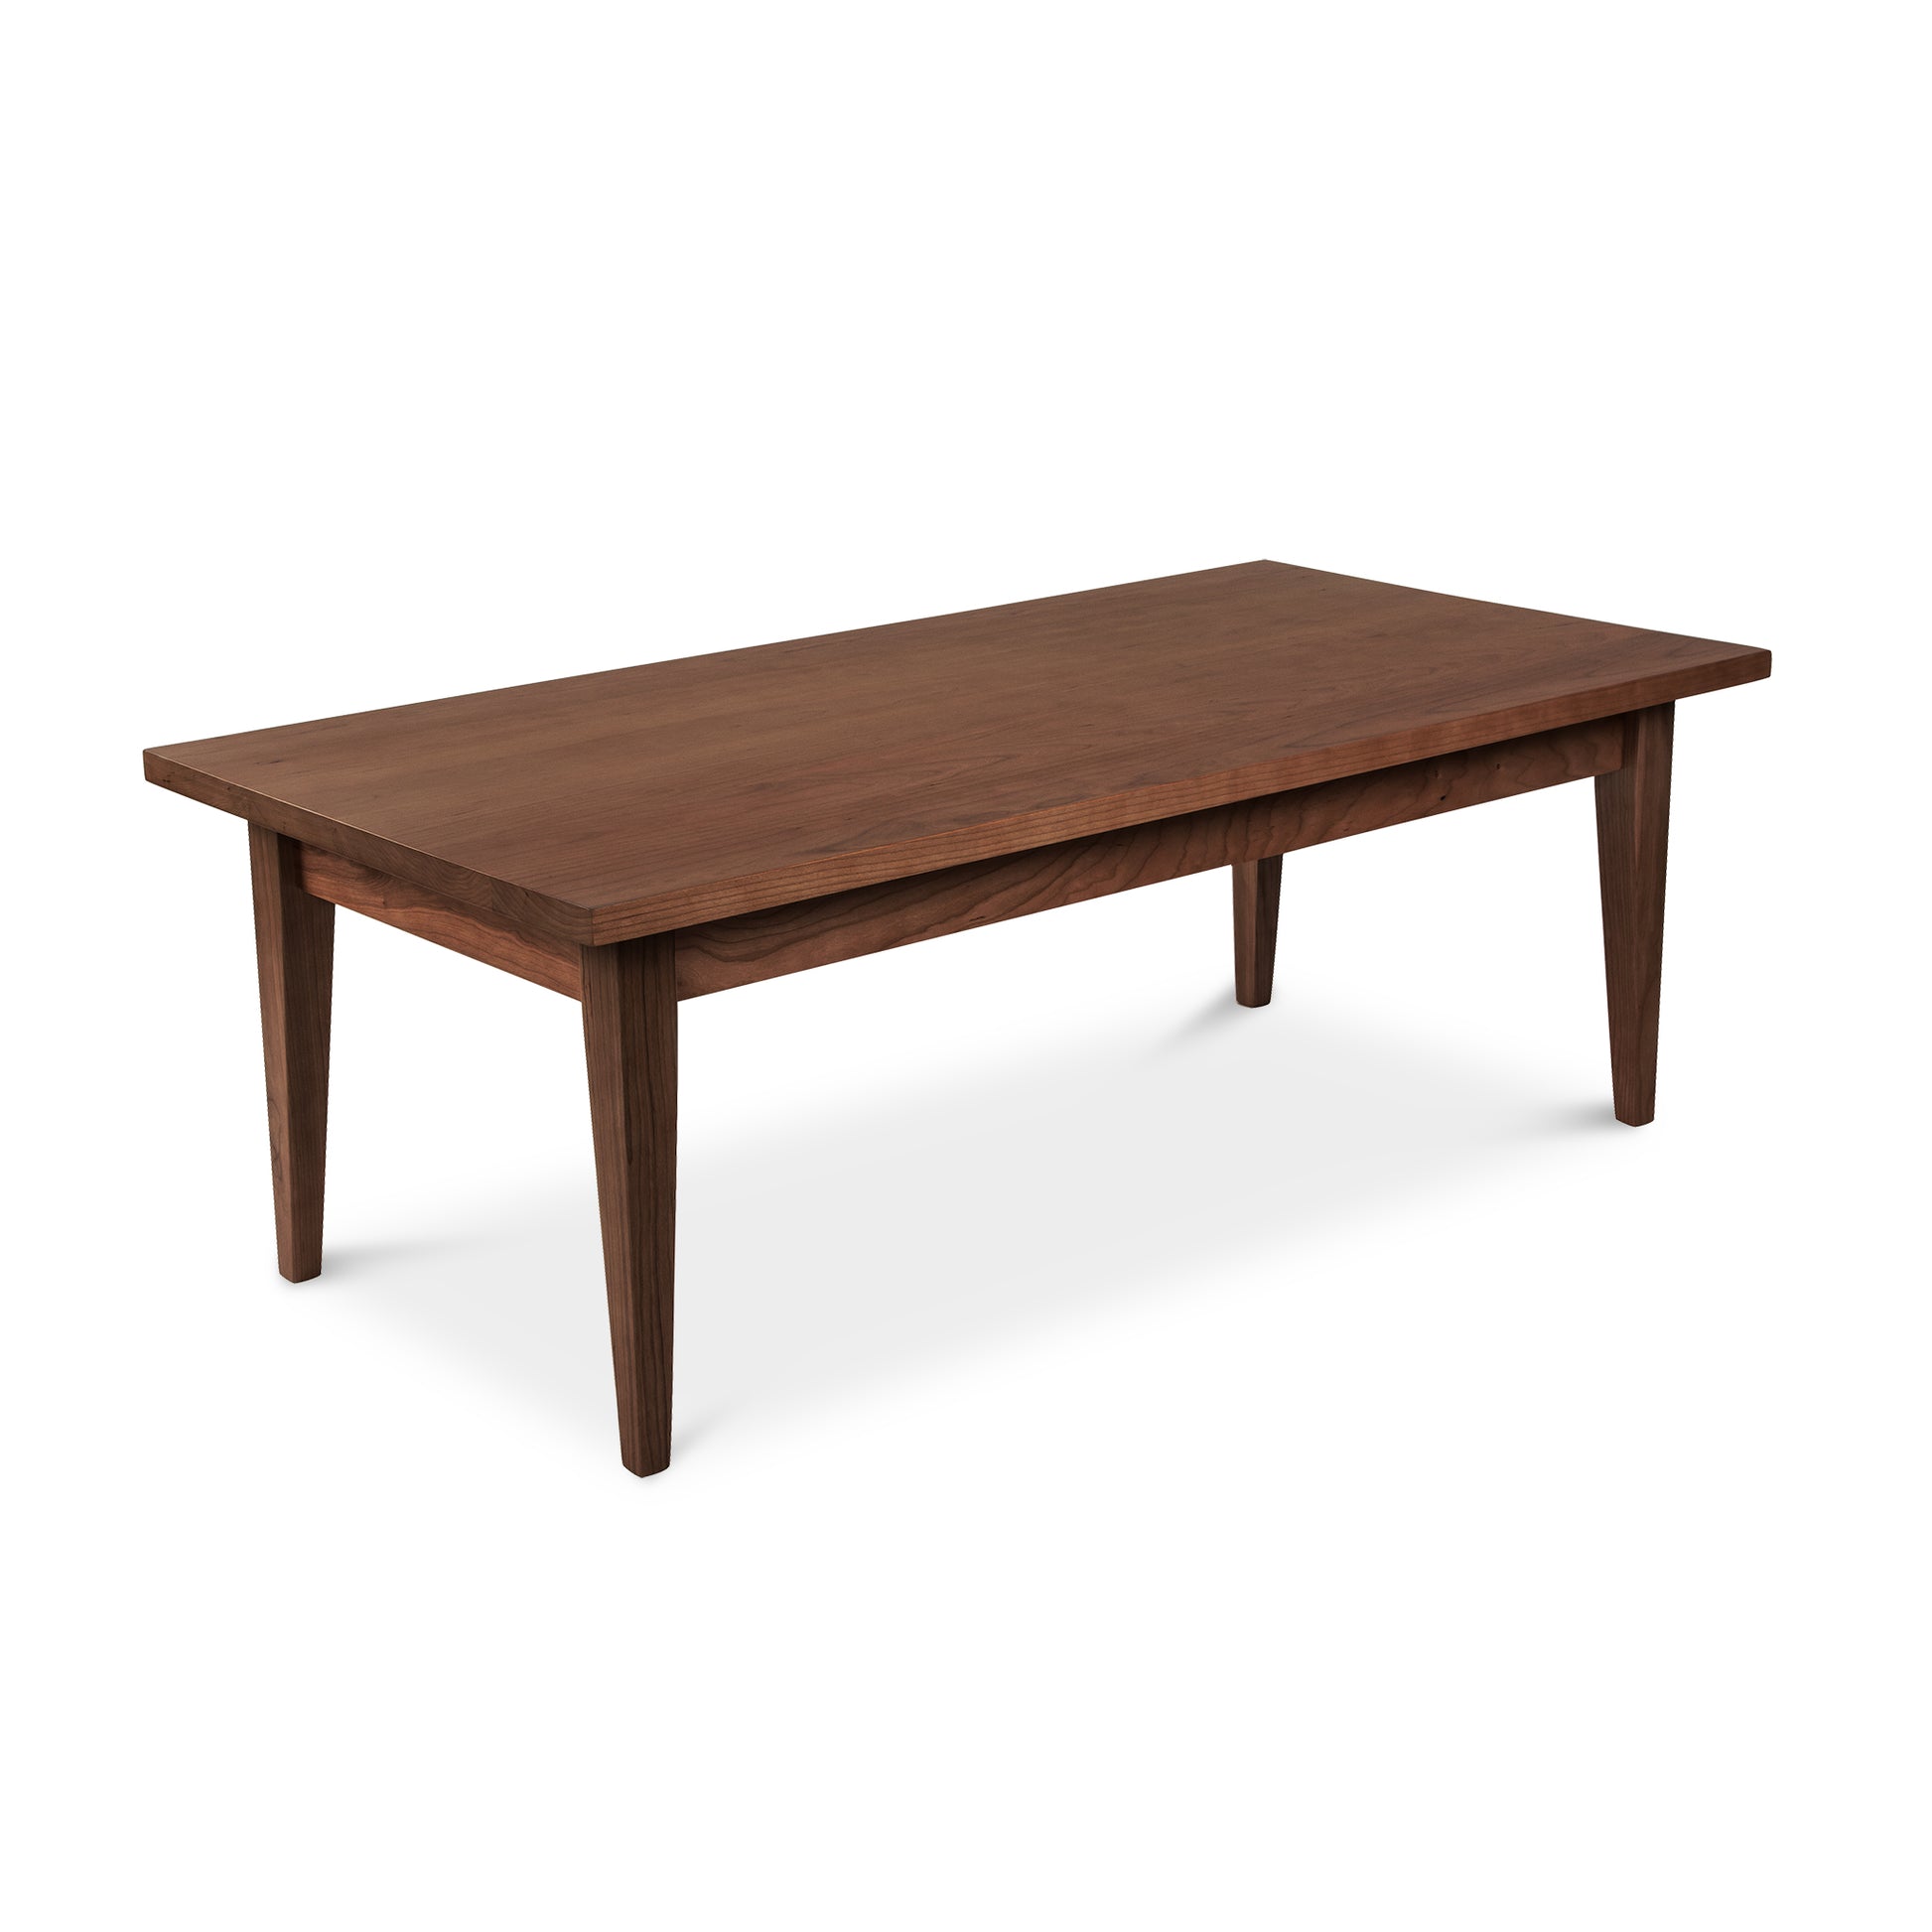 Classic Shaker Coffee Table from Lyndon Furniture, handcrafted with a wooden top, perfect for upscale living rooms.